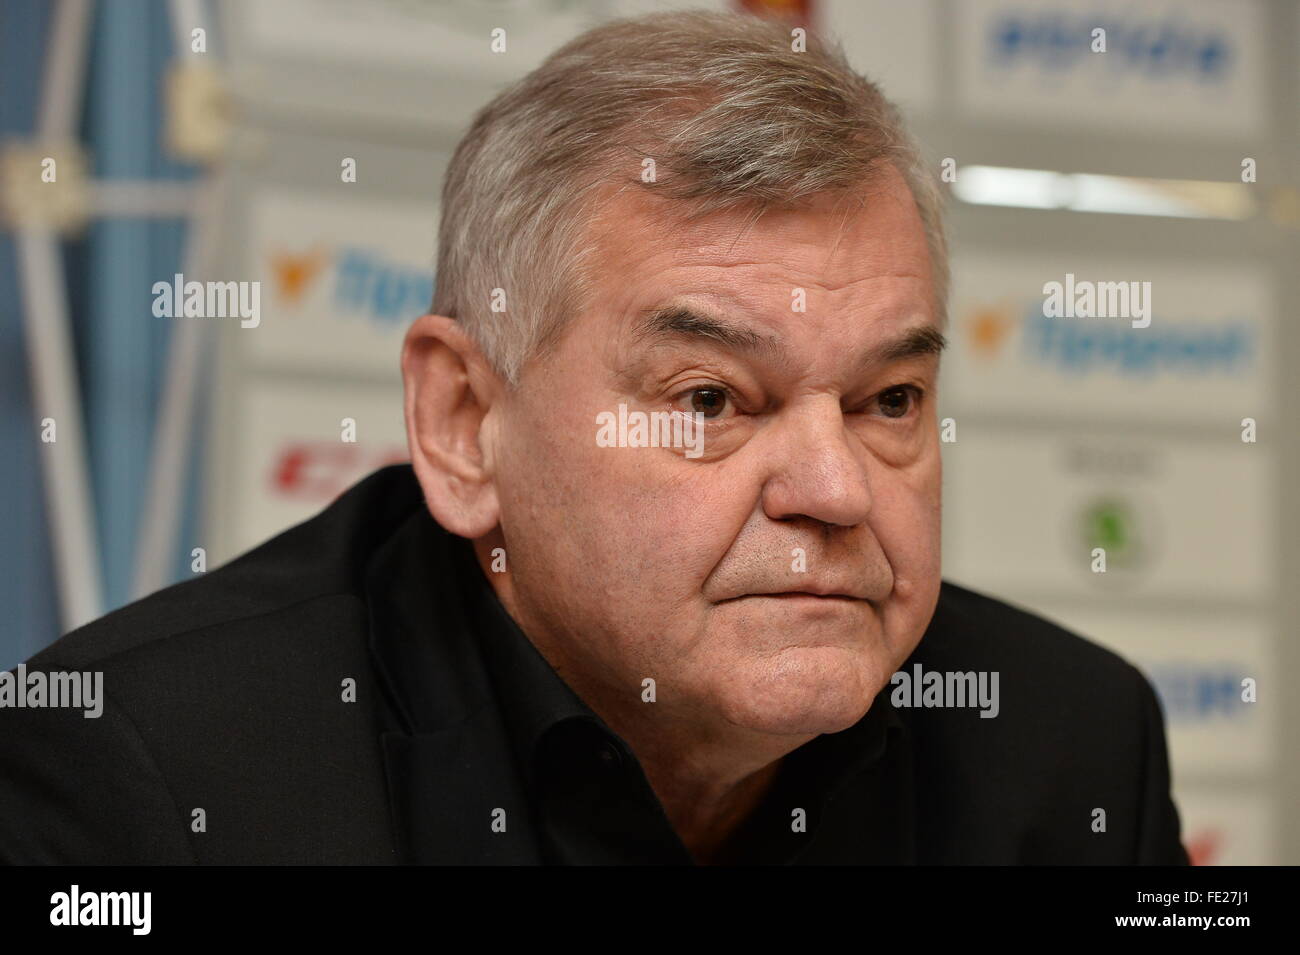 Prague, Czech Republic. 04th Feb, 2016. Press conference to announce national hockey teams roster for Euro Hockey Tour two games with Russia and present new operational team for 2016/17 season with Czech coach Vladimir Vujtek in Prague, Czech Republic, February 4, 2016. © Katerina Sulova/CTK Photo/Alamy Live News Stock Photo